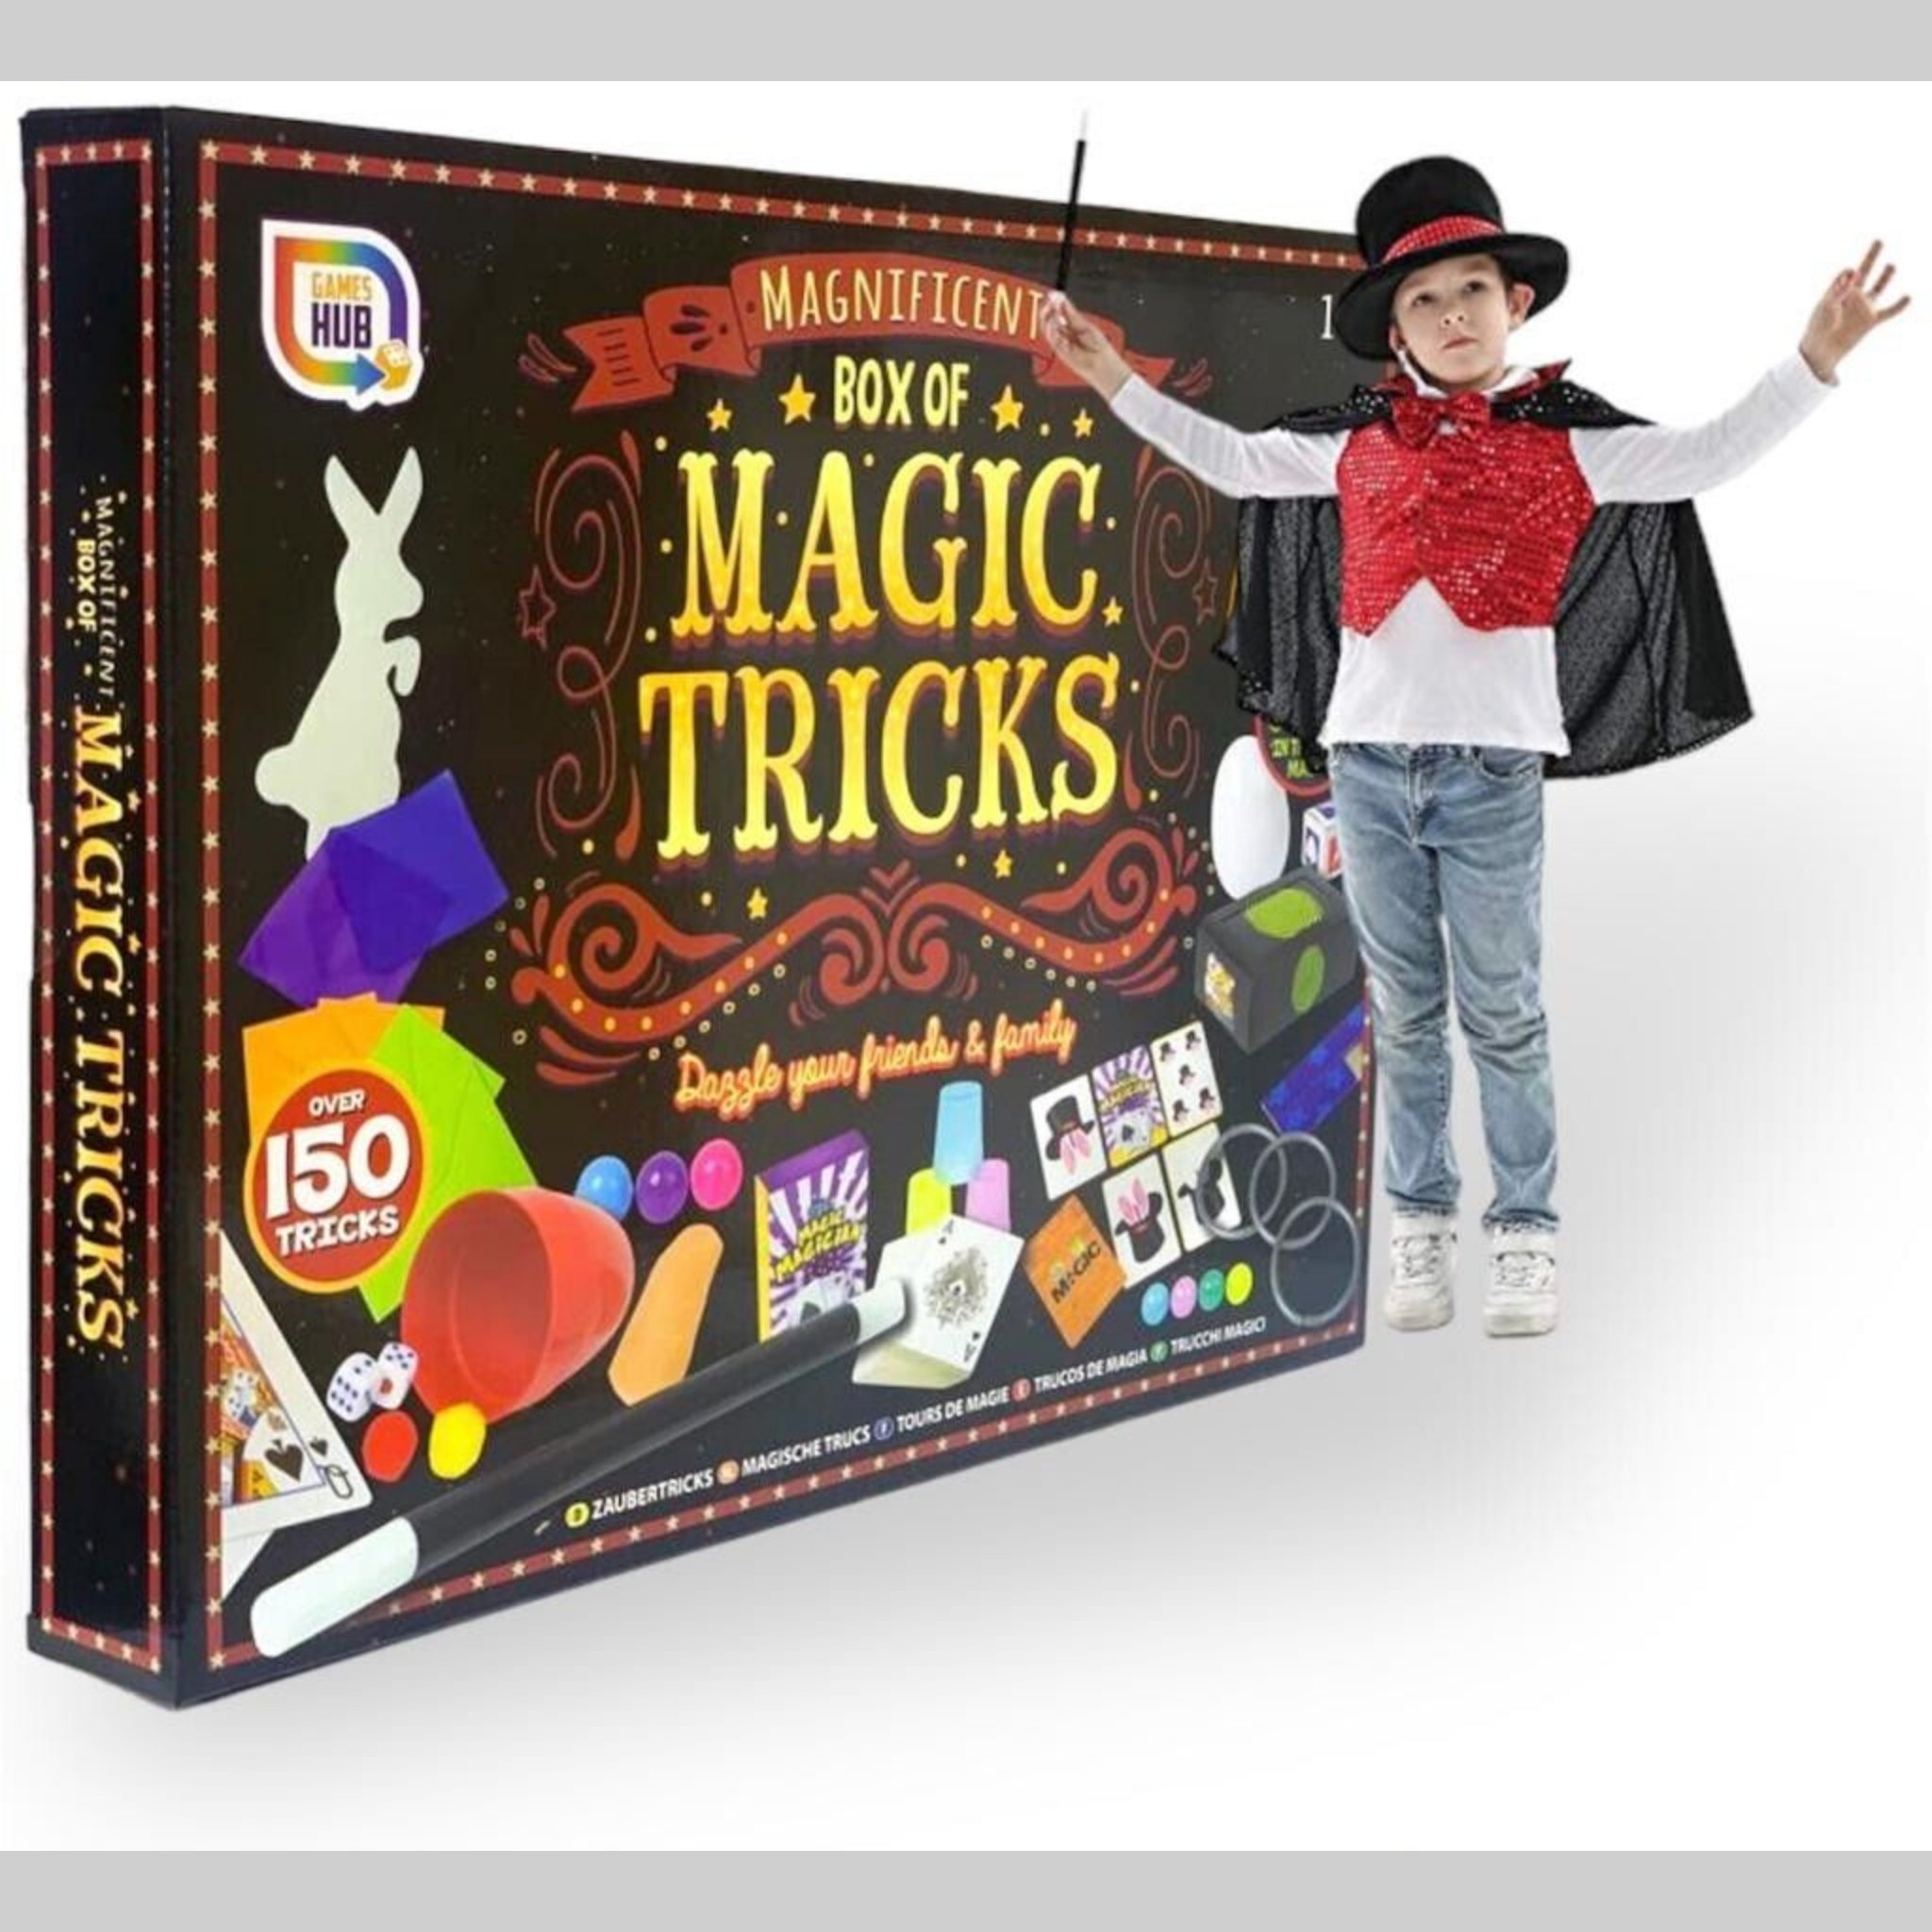 Beclen Harp Deluxe 150 Tricks Of Magic And Illusion Dark Magician Box Set For Kids-Perfect Christmas/Xmas Gift/Present Set